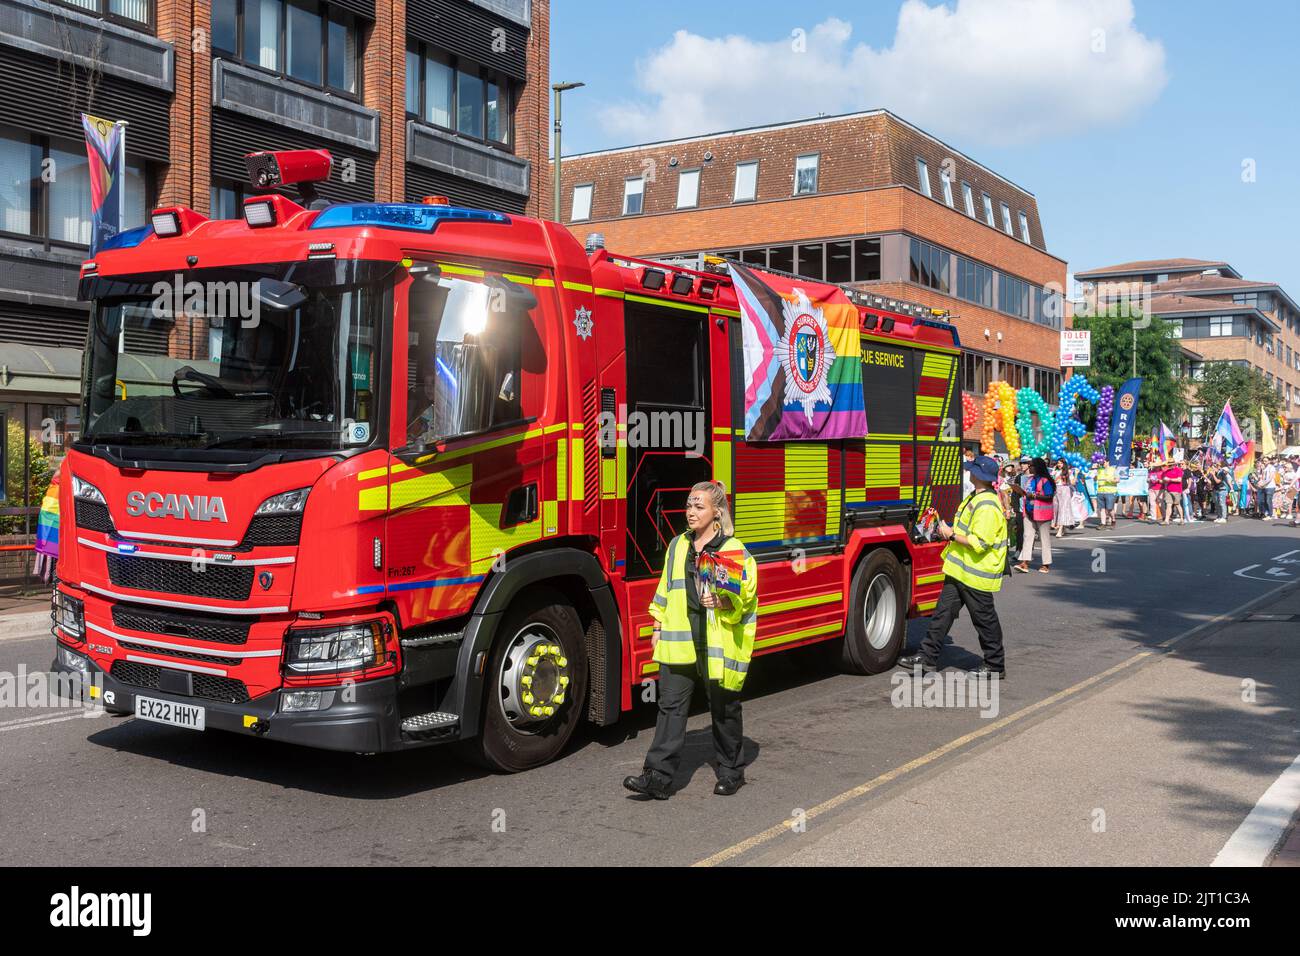 Pride in Surrey parade in Camberley Town on 27th August 2022, Surrey, England, UK. Fire engine leading the march for LGBTQ+ rights. Stock Photo